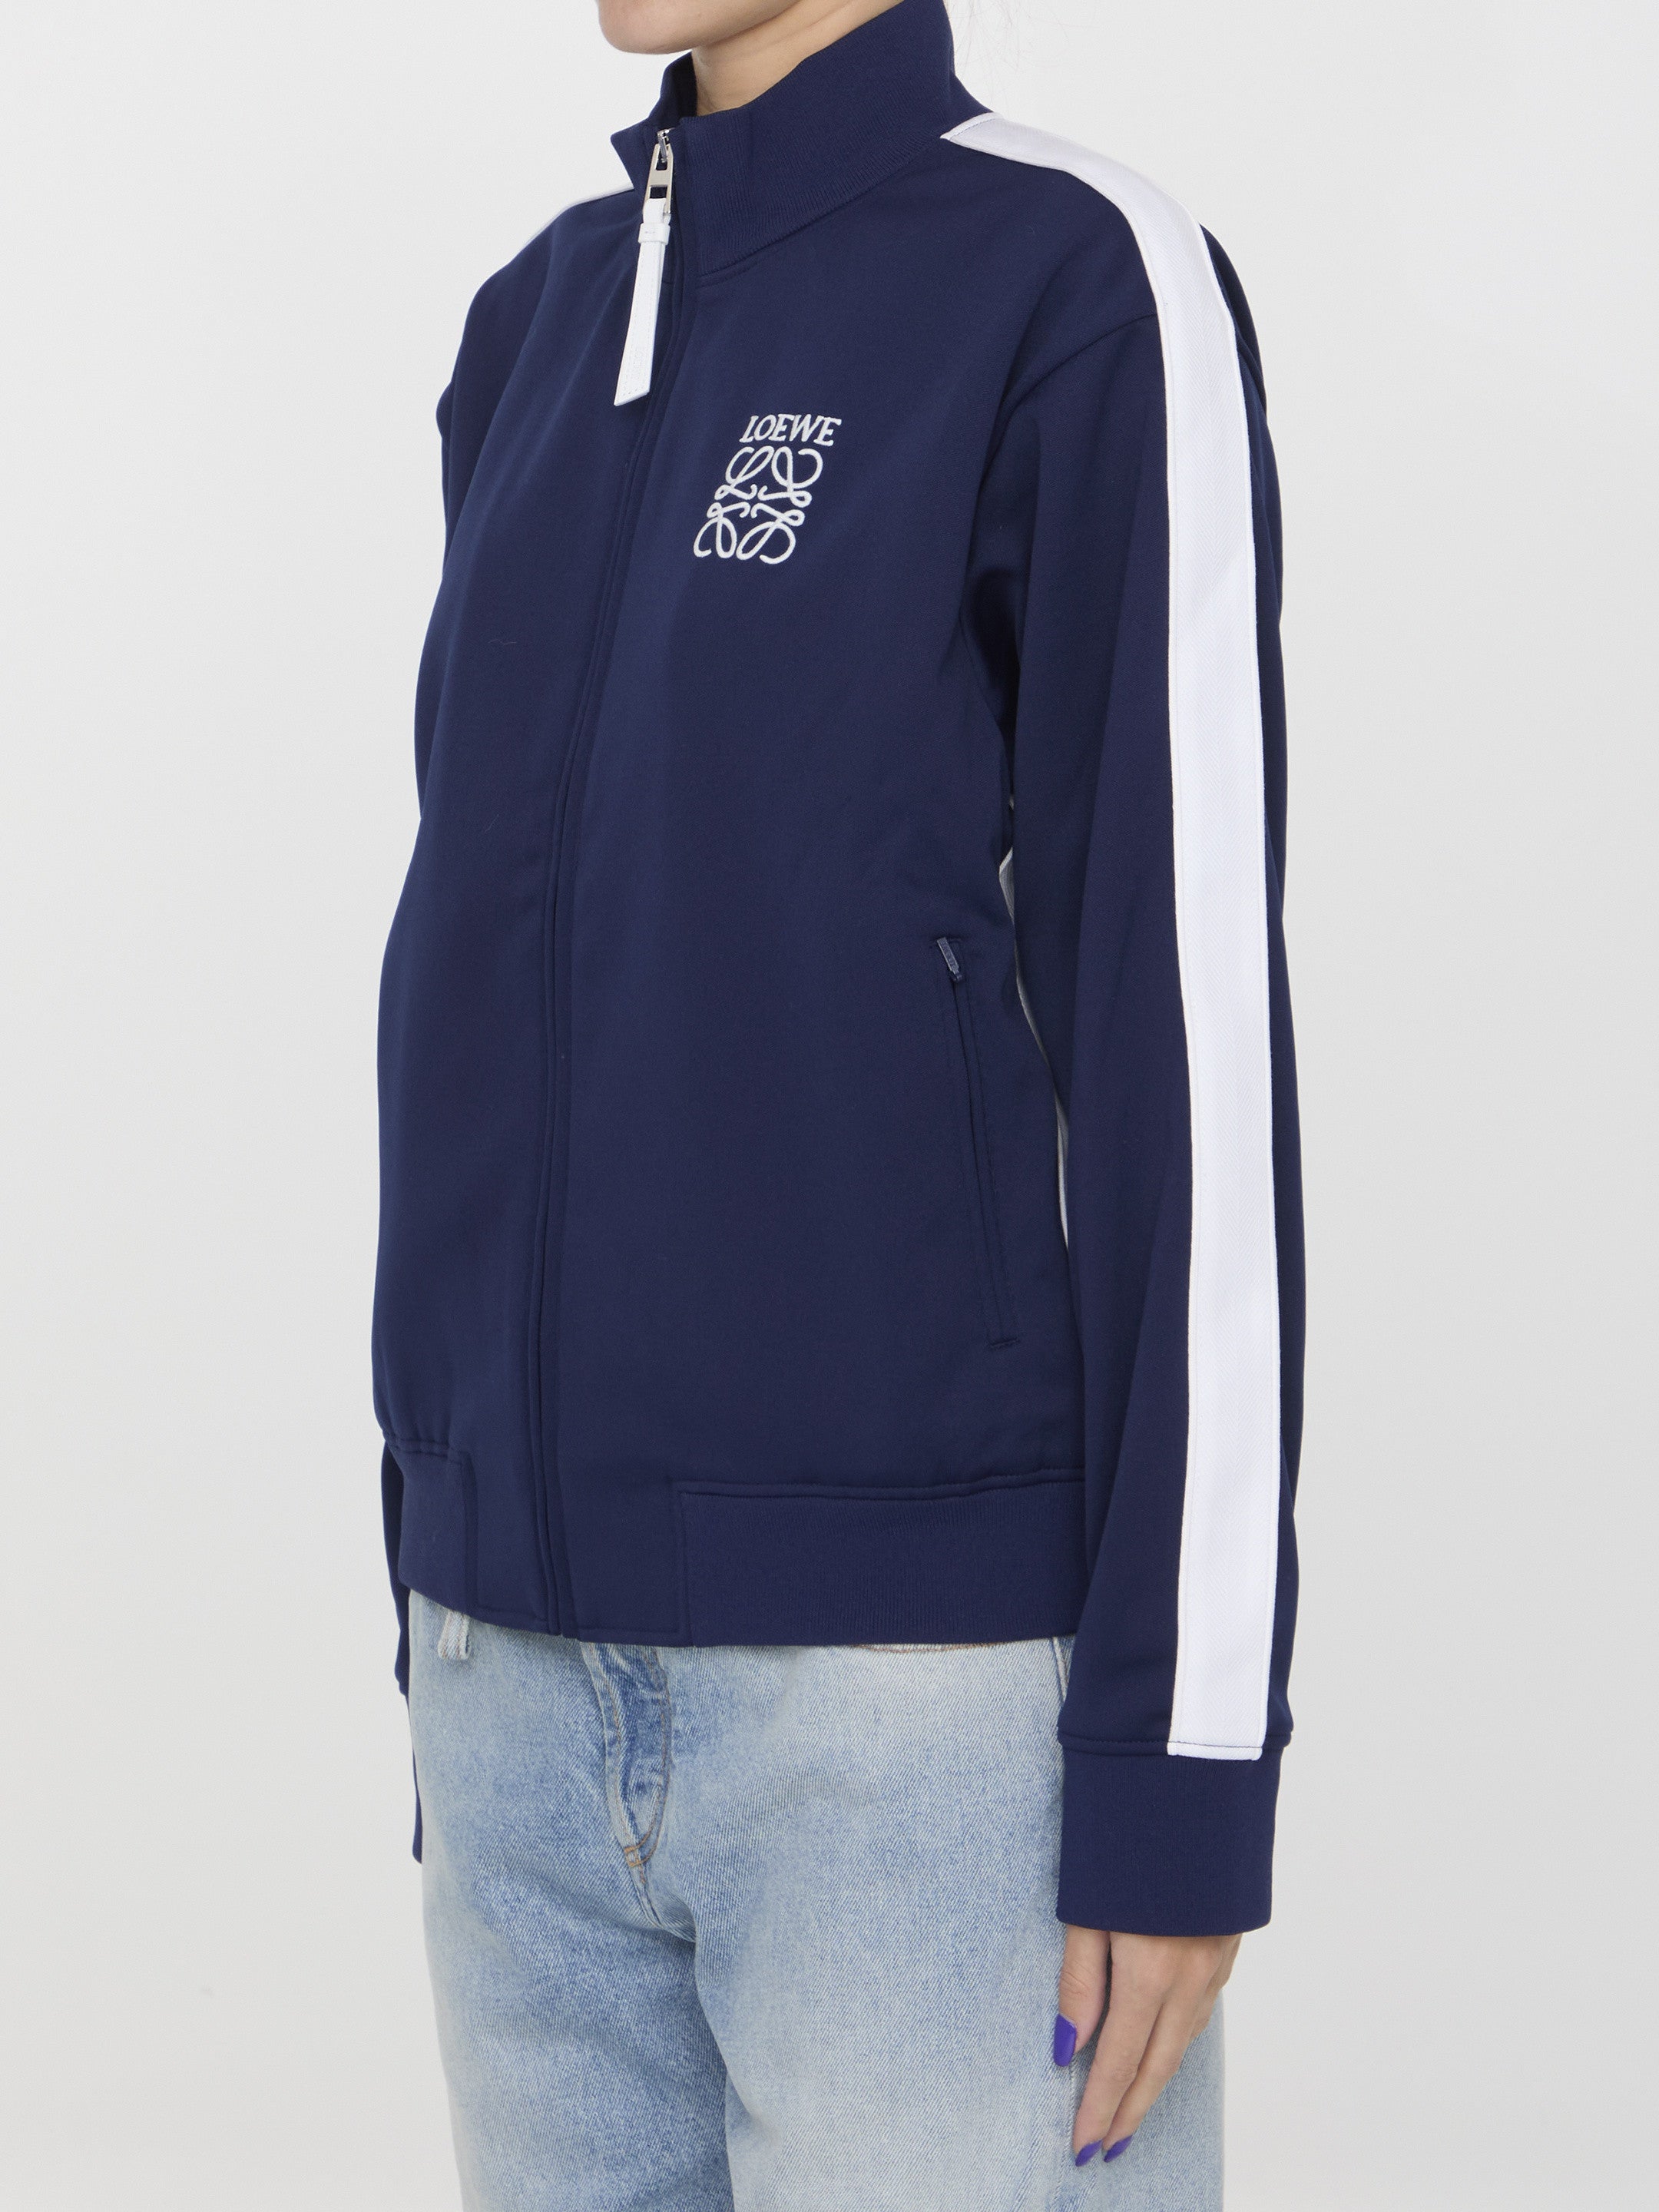 Tracksuit jacket in technical jersey